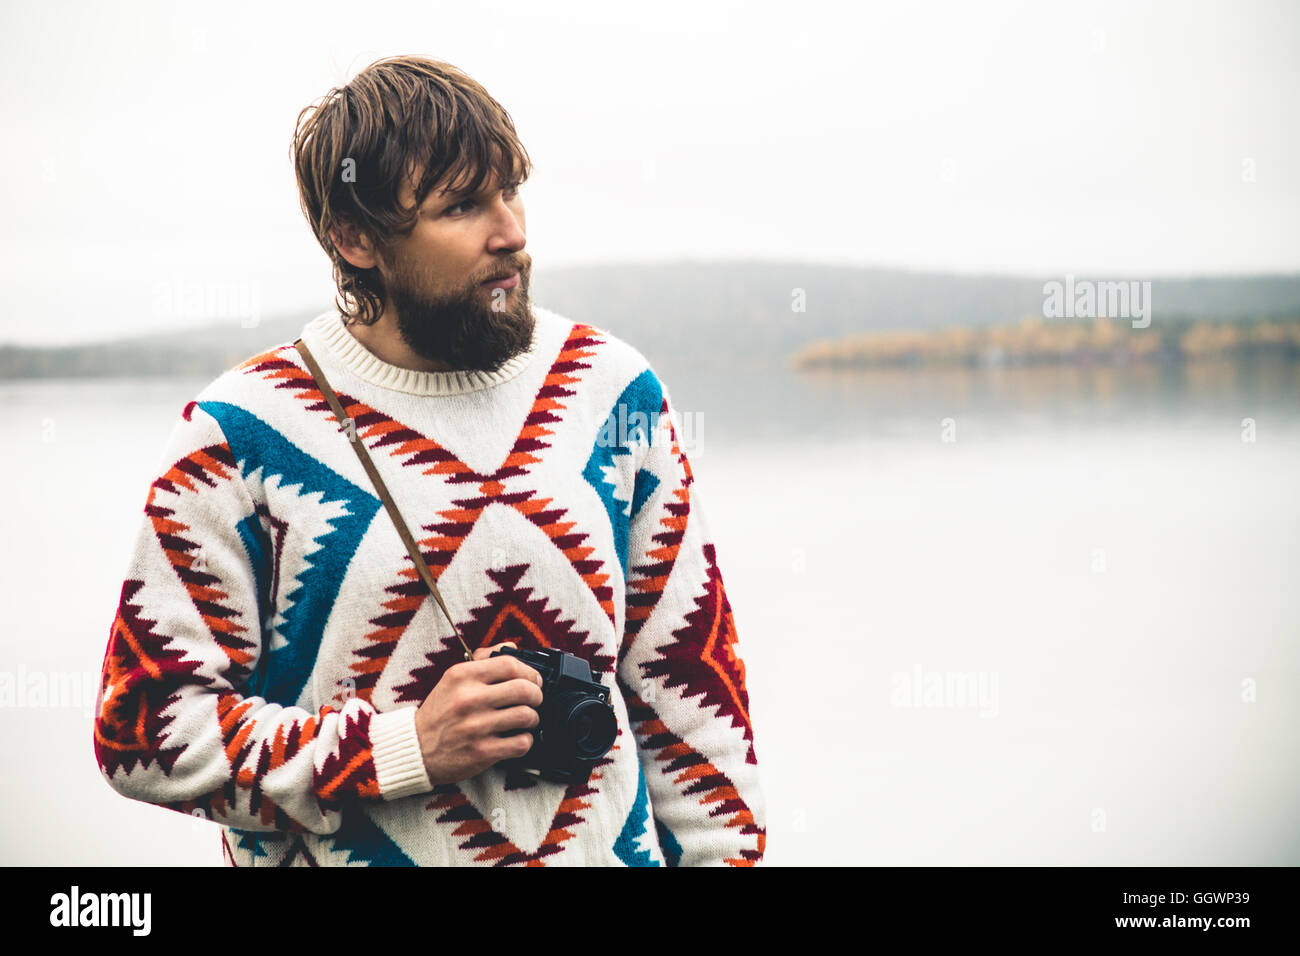 Young Man bearded with retro photo camera Fashion Travel Lifestyle wearing knitted sweater clothing outdoor foggy nature on back Stock Photo